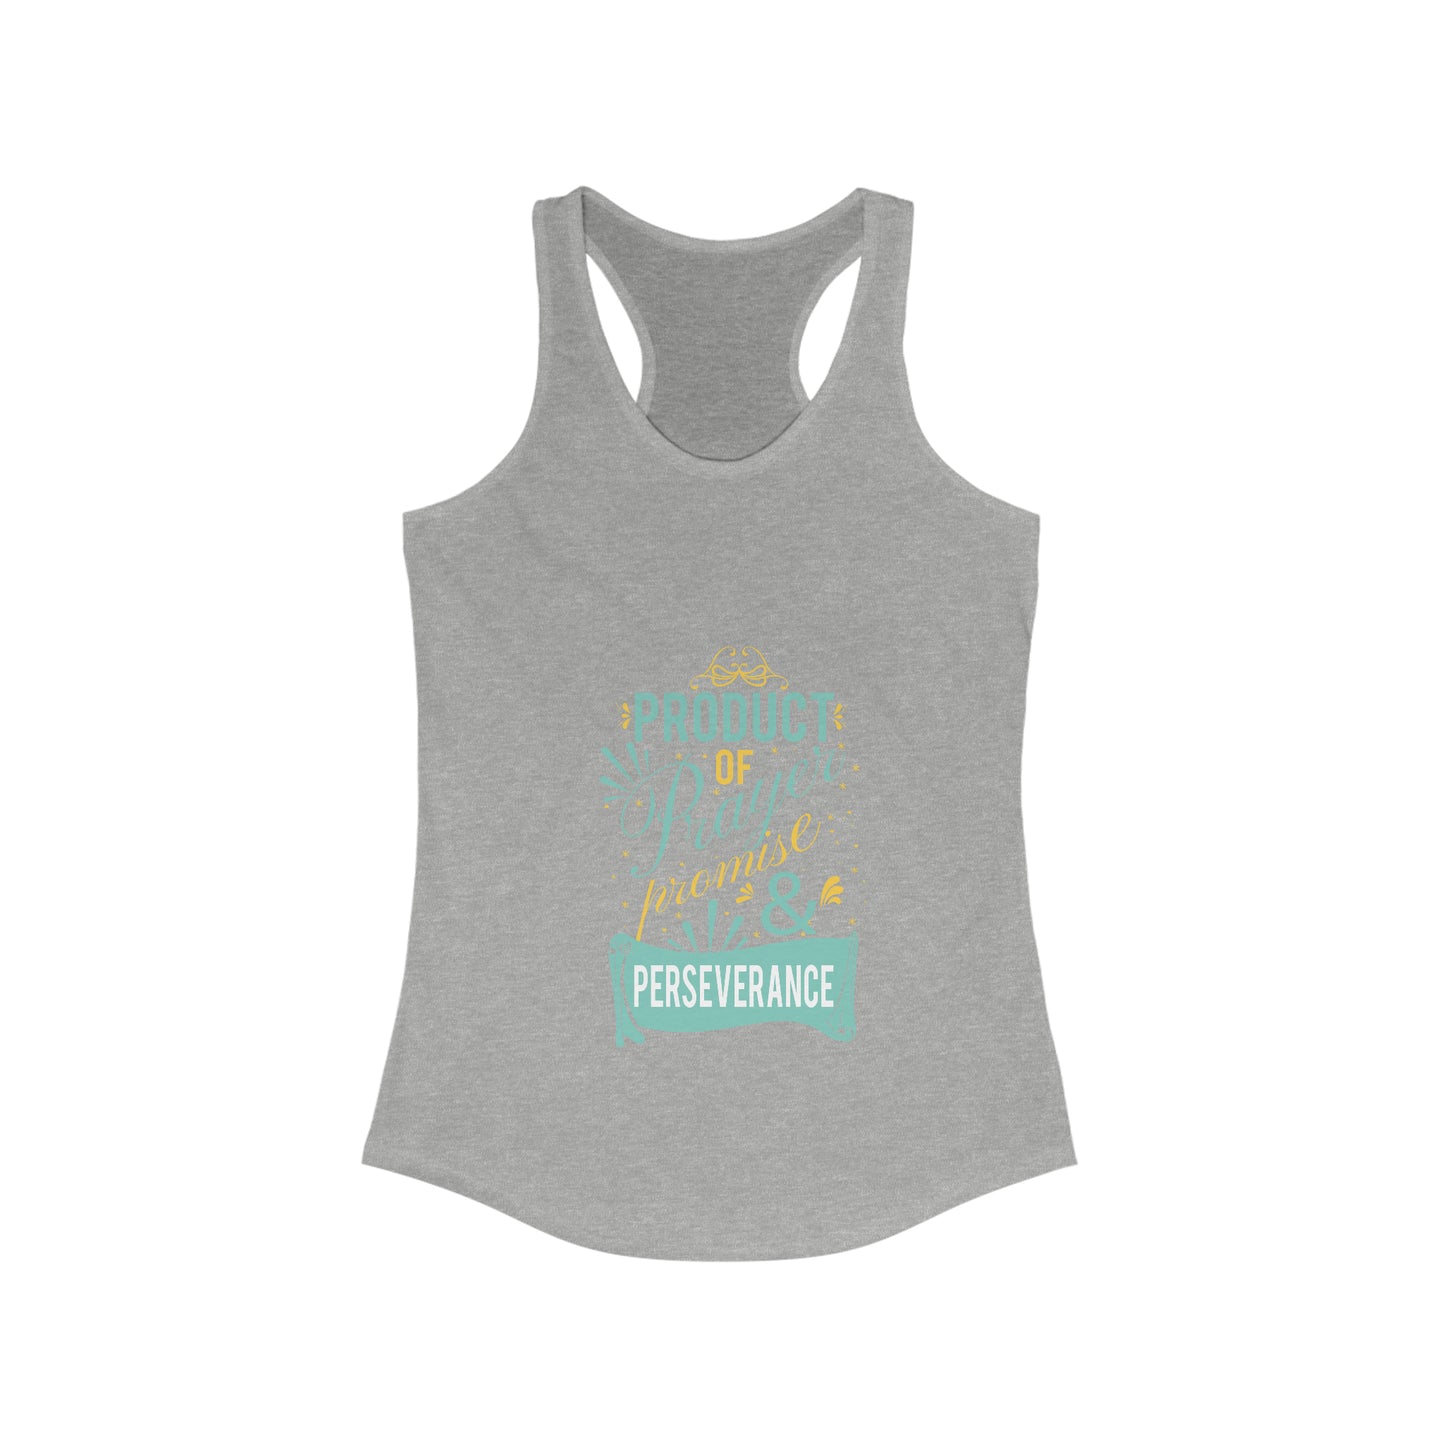 Product of Prayer, Promise, and Perseverance slim fit tank-top